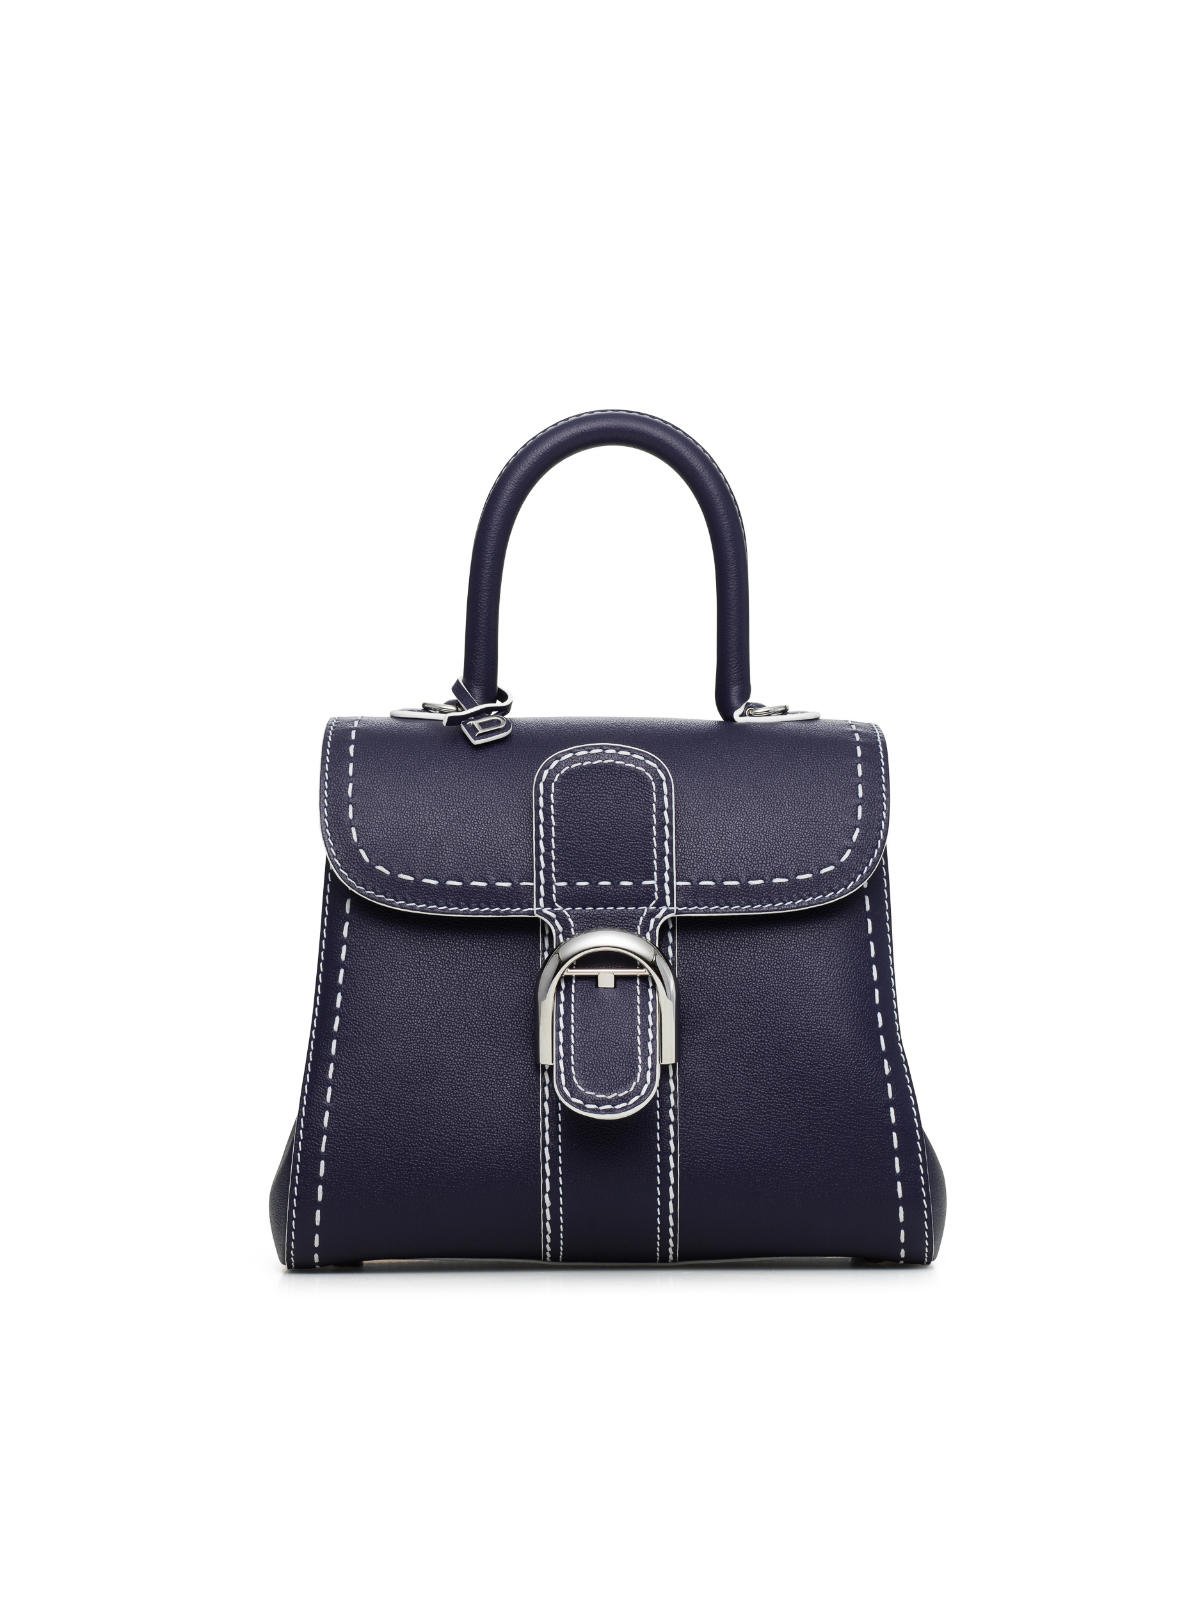 Delvaux's Inspiring Collection - The Ocean